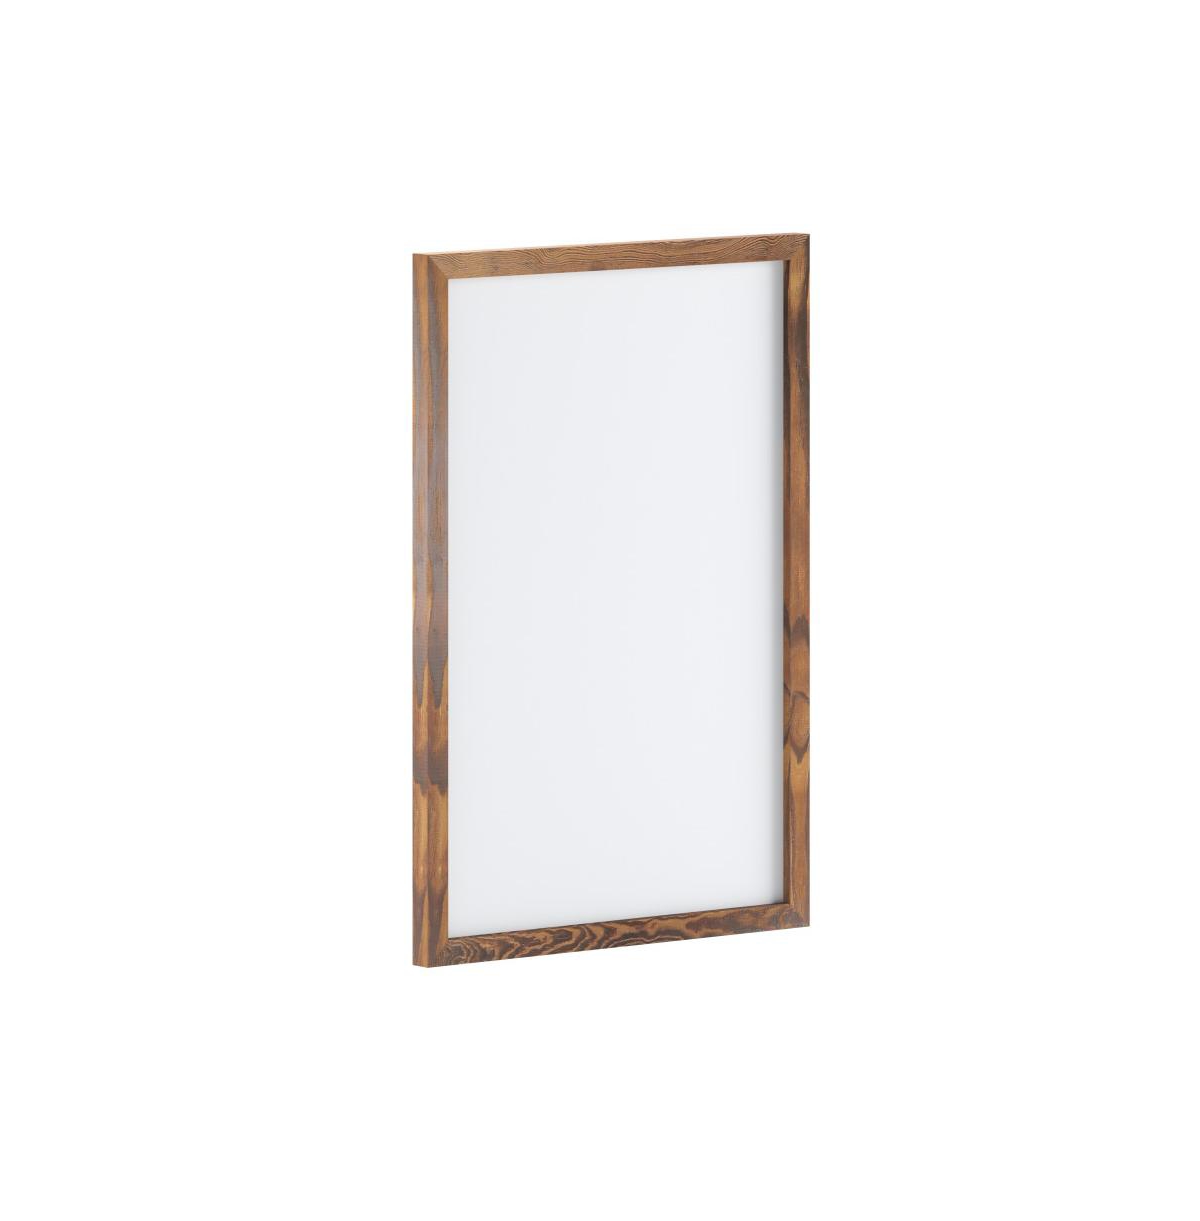 Cilla Magnetic Wall Mounted White Board with Wood Frame - White washed